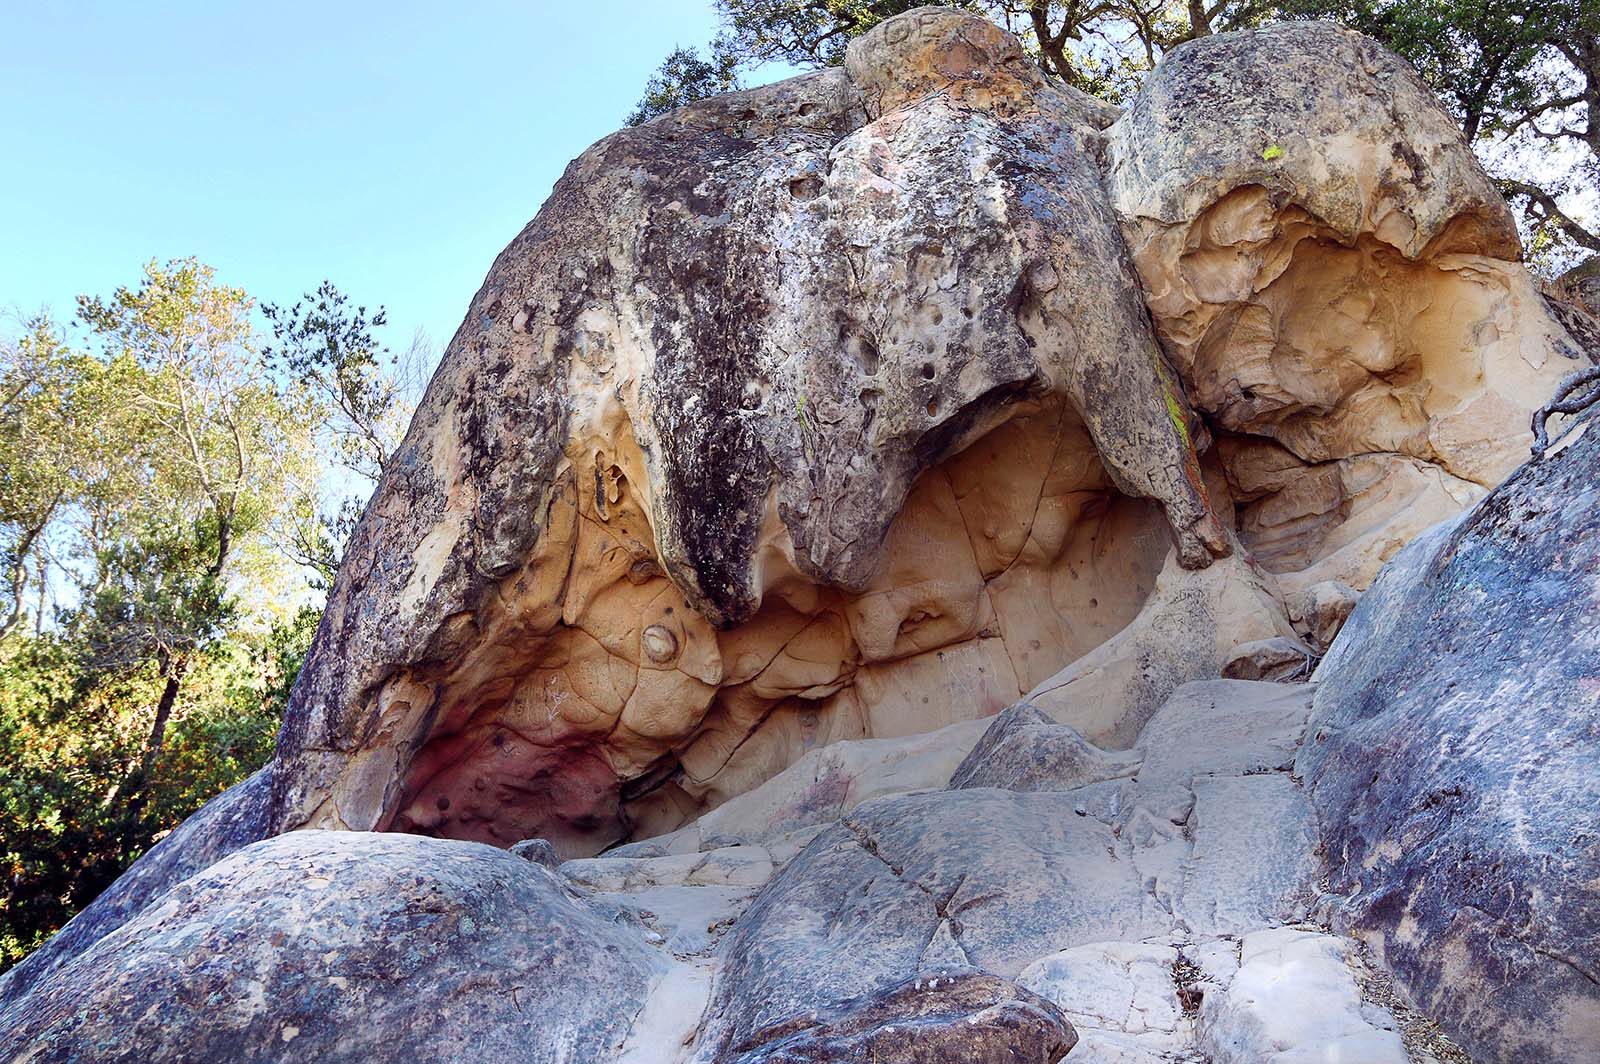 Mount Diablo has some beautiful historic hiking trails you can take including the Rock City Wind Caves trail which winds you through a slot canyon & lookout point